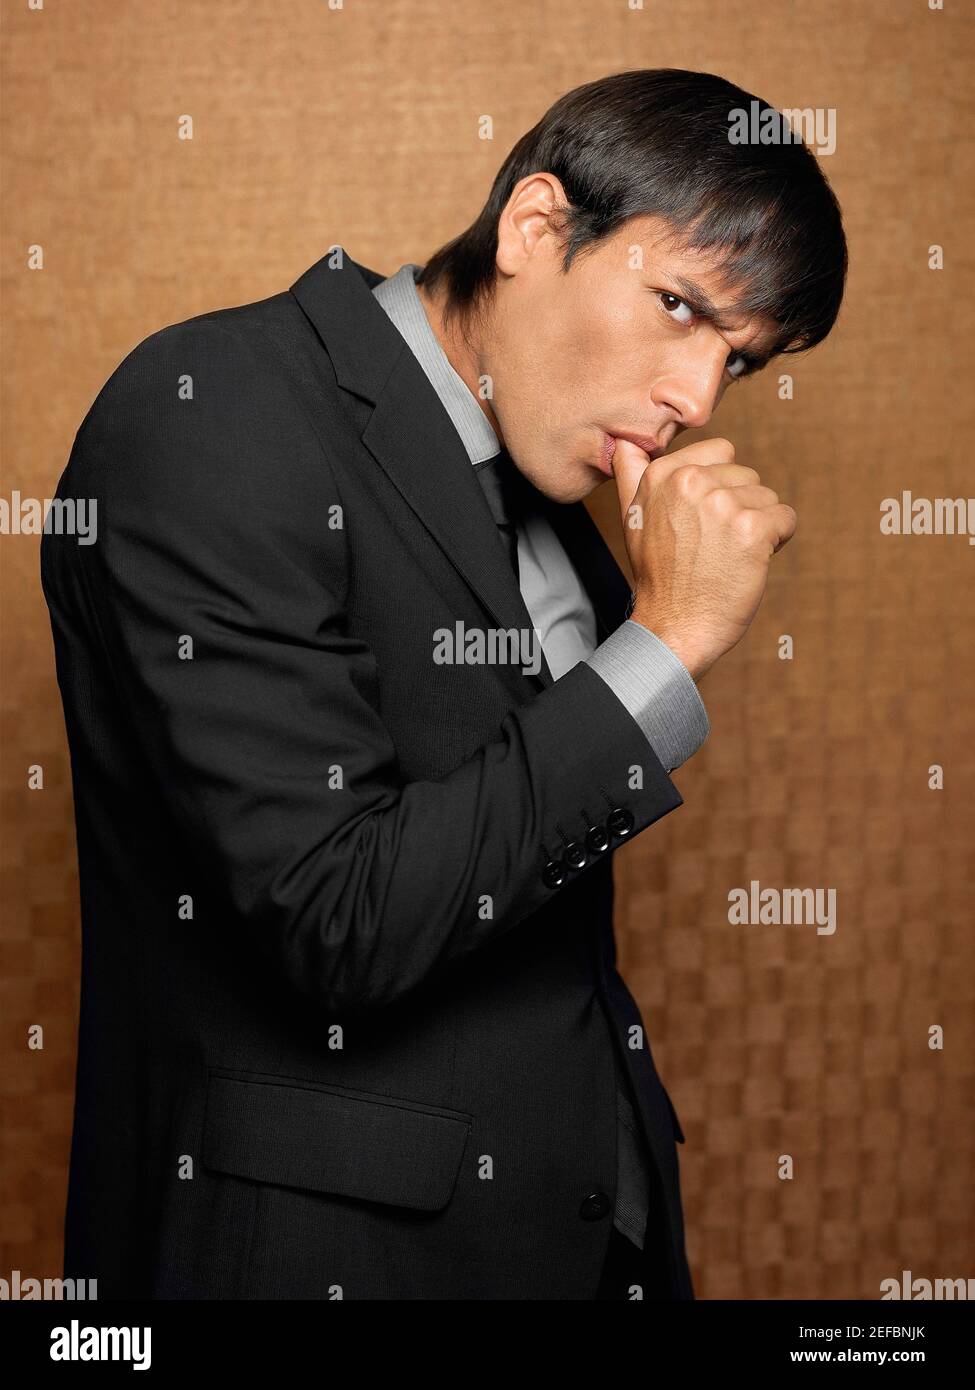 Side profile of a businessman sucking his thumb Stock Photo